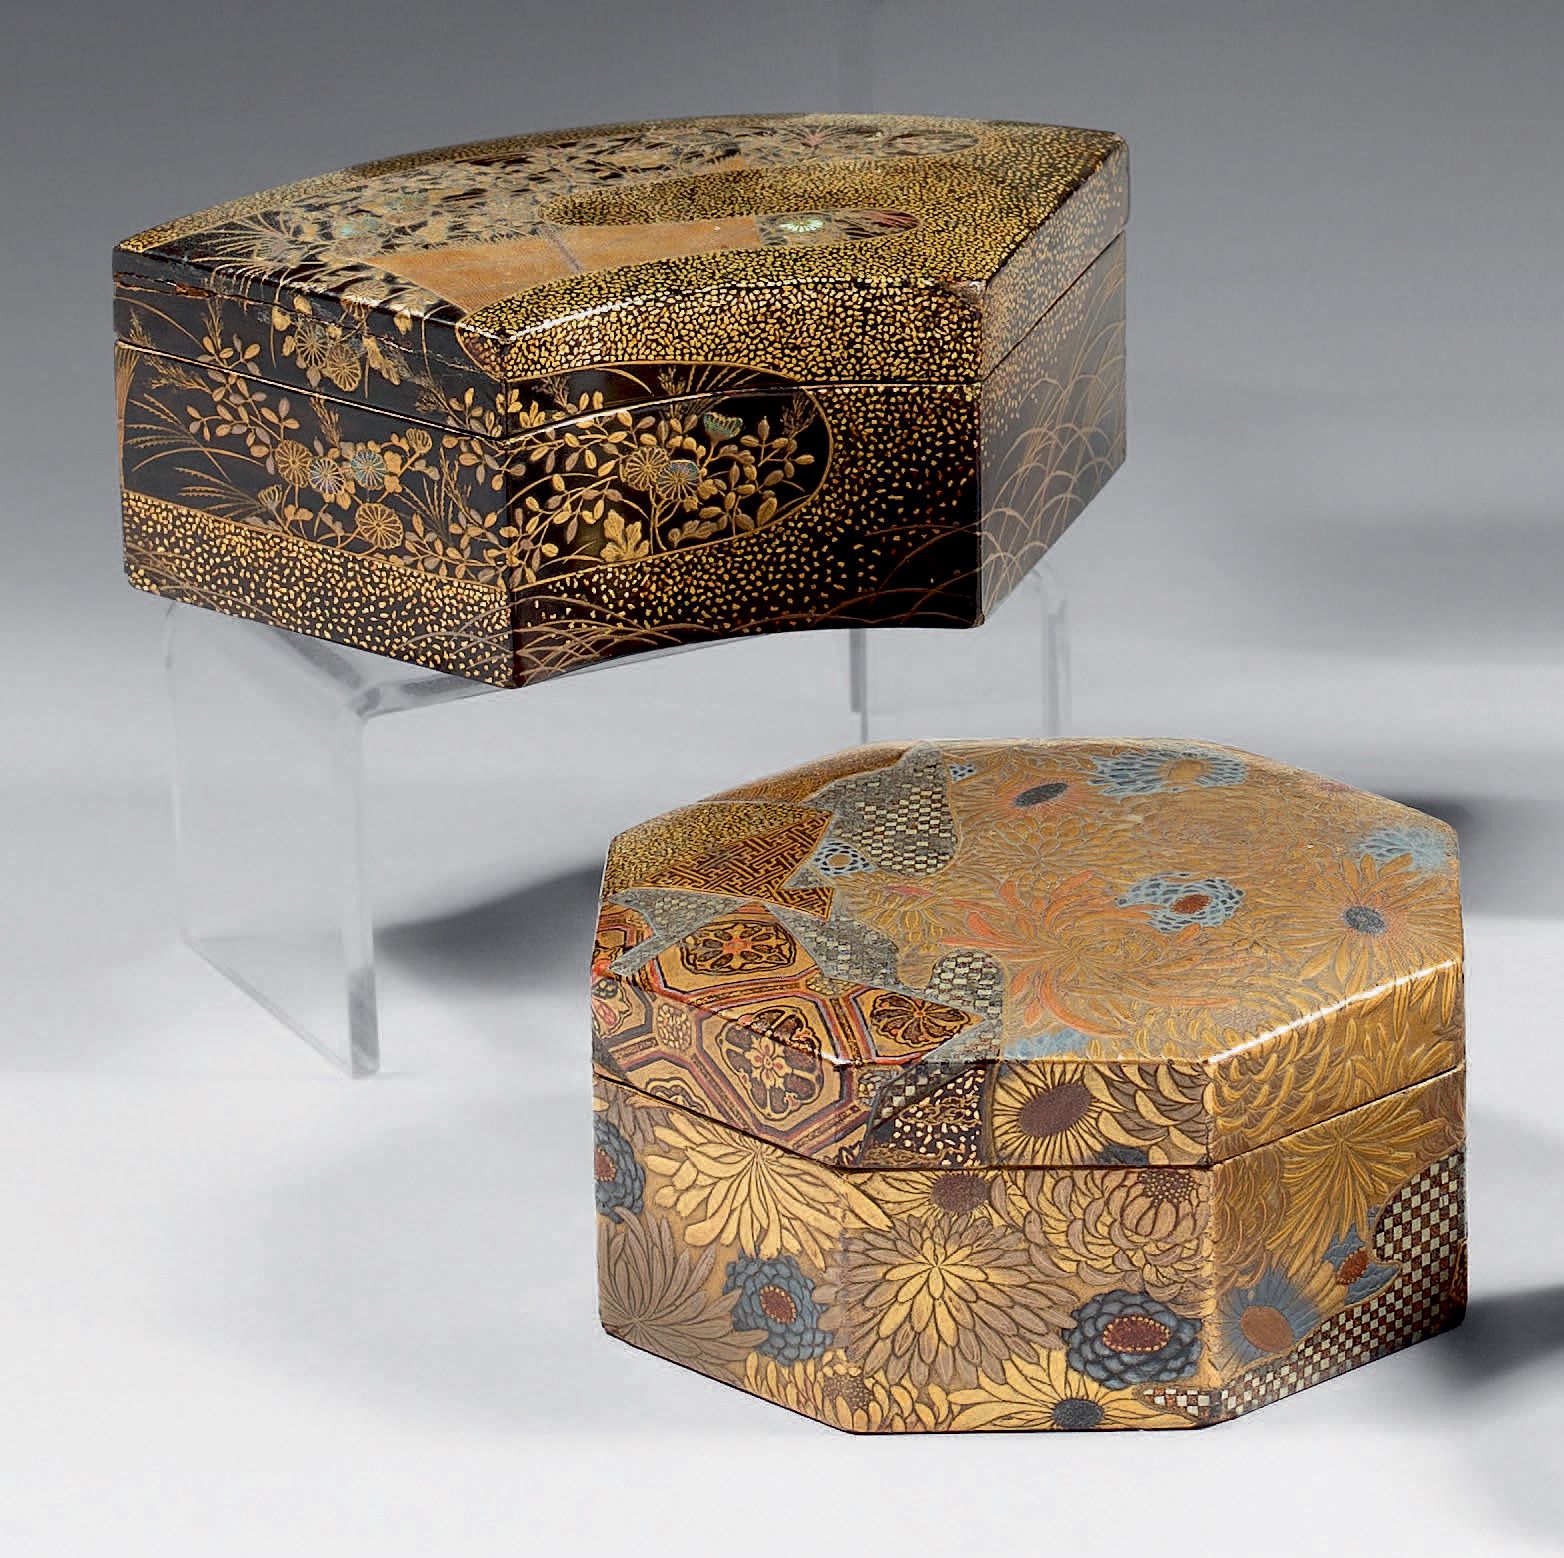 JAPON - Époque Edo (1603-1868), XIXe siècle Octagonal box in gold, silver and re&hellip;